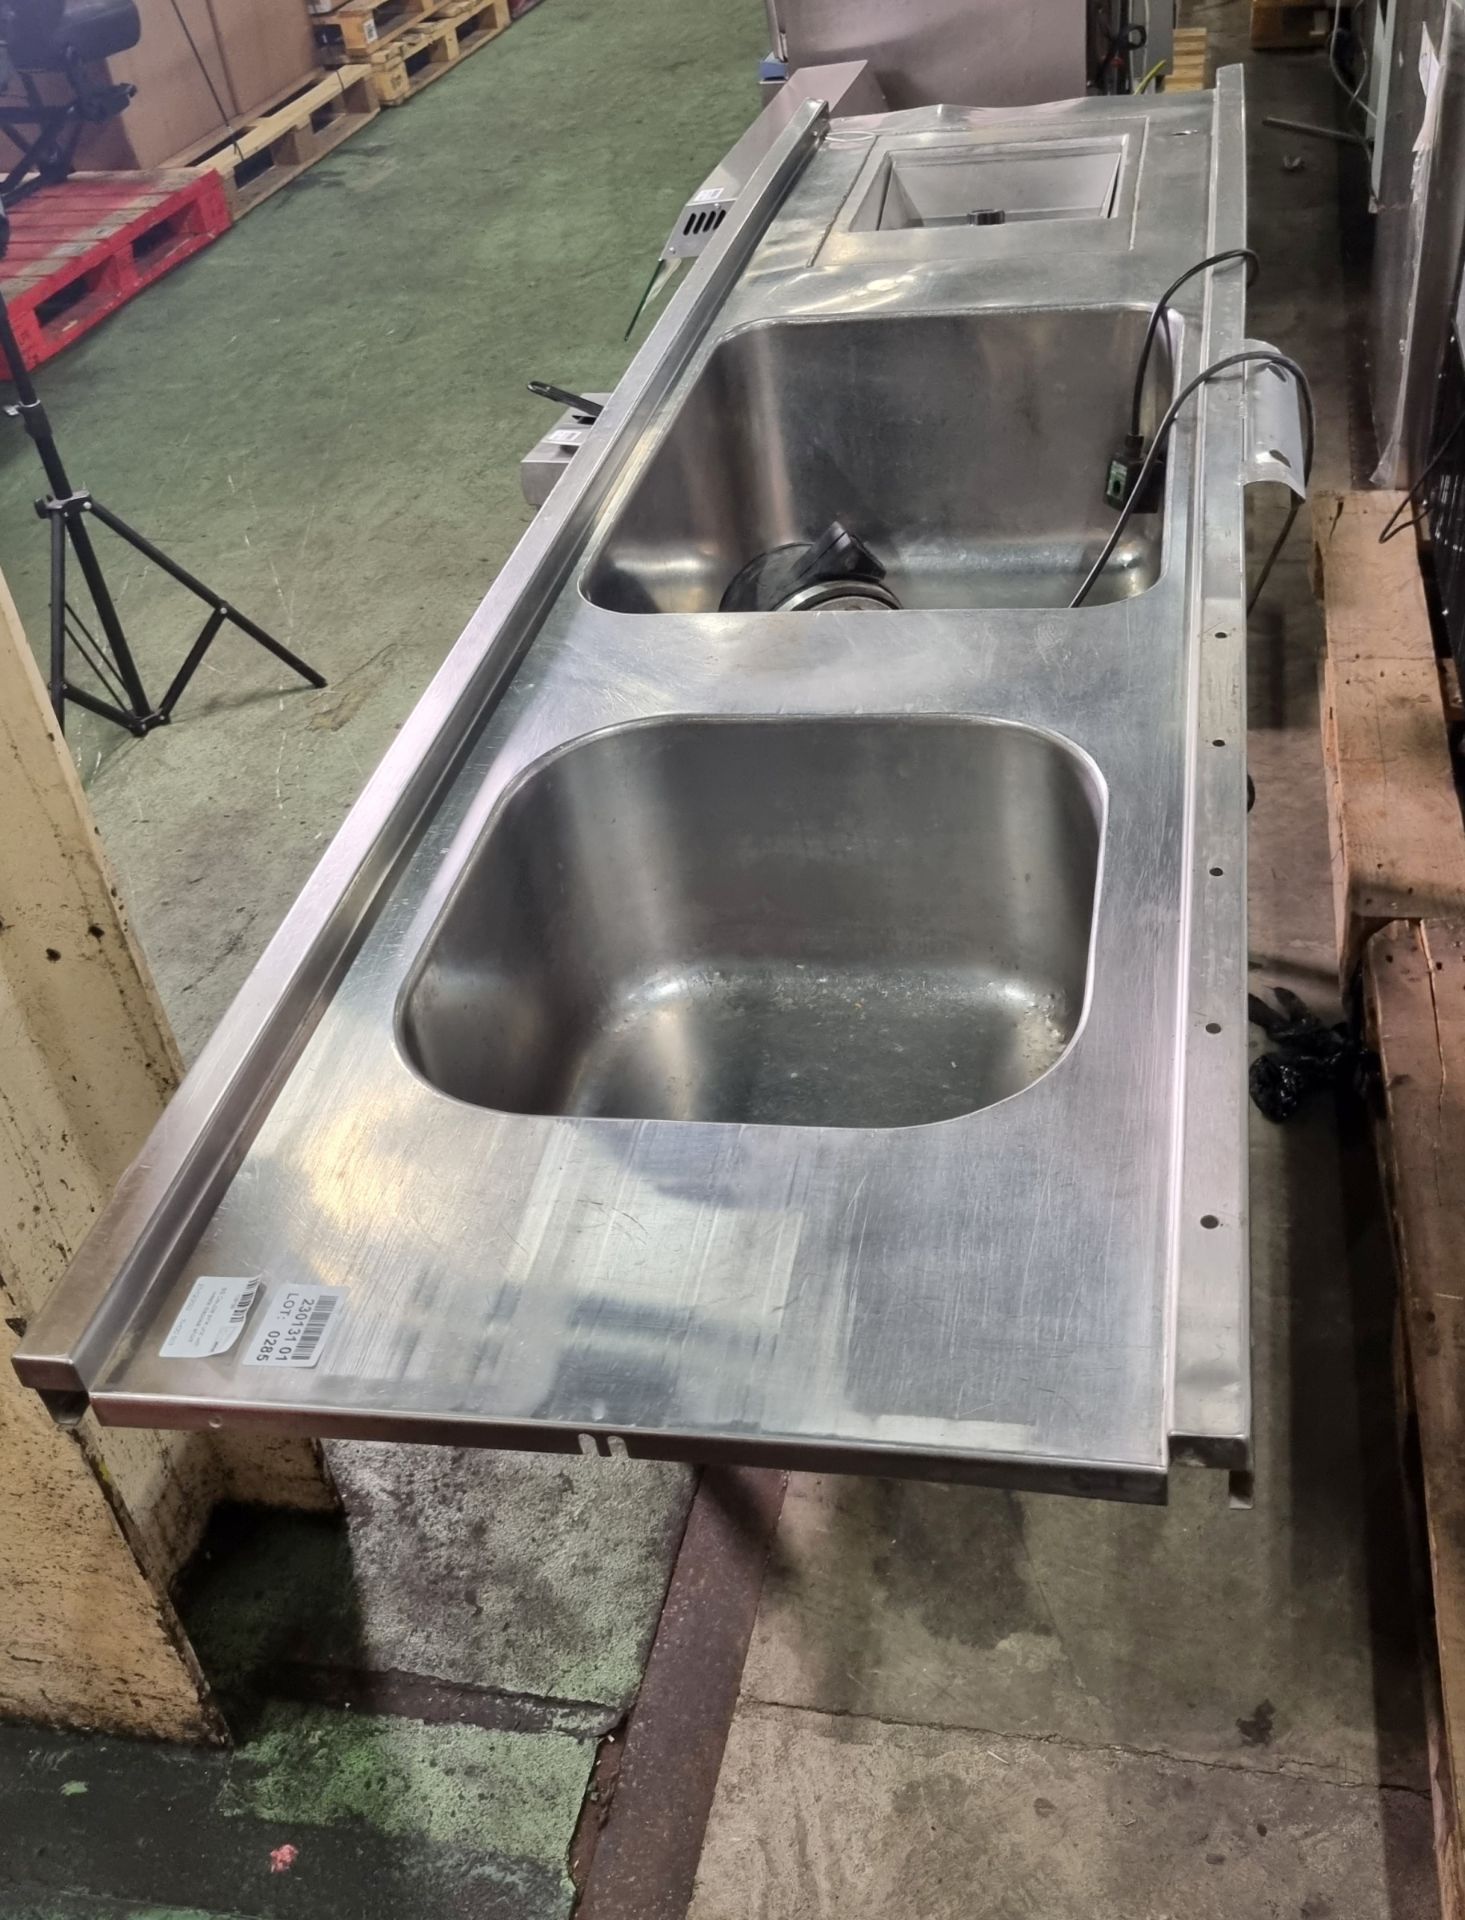 Stainless steel double sink unit with waste disposal shoot (5 pin connector for motor) - Image 2 of 7